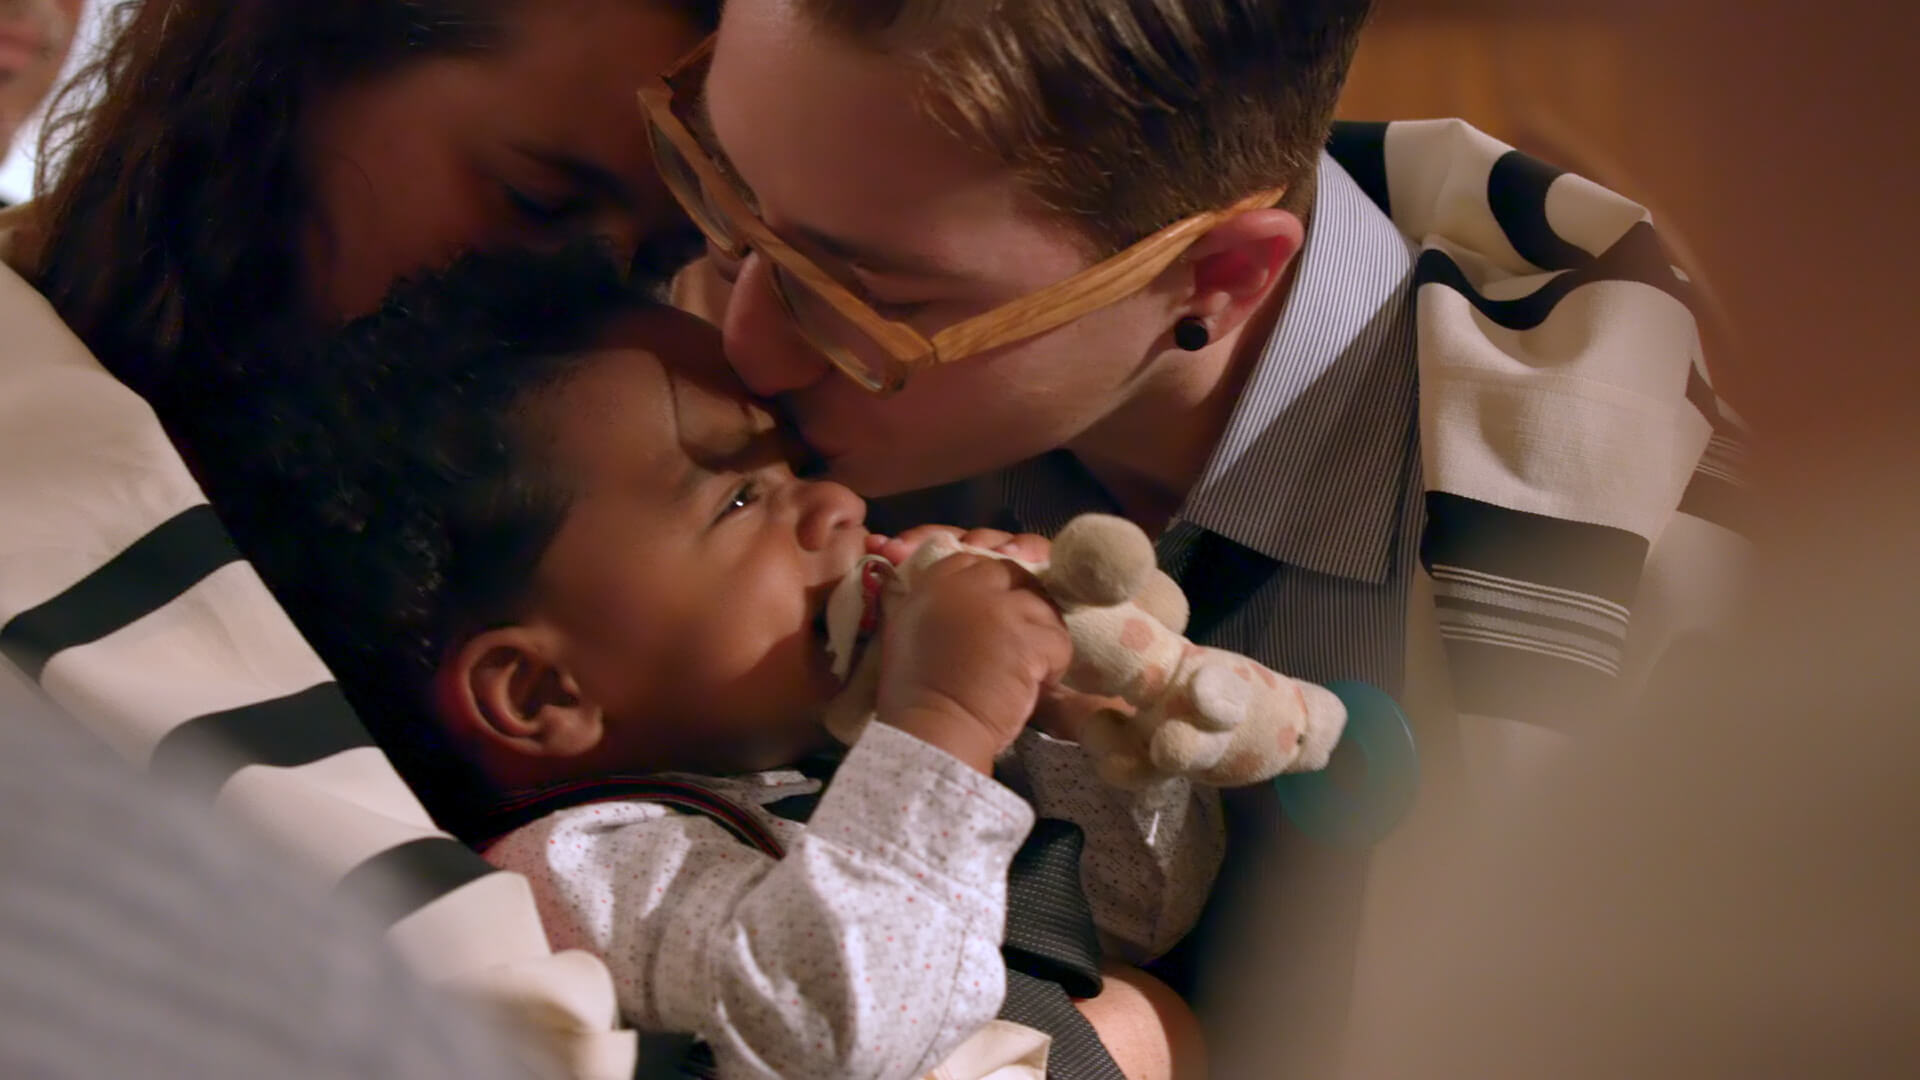 Still from The F Word. A nonbinary individual with short auburn hair and wood-framed glasses kisses their adopted Black and Filipino baby on the forehead.